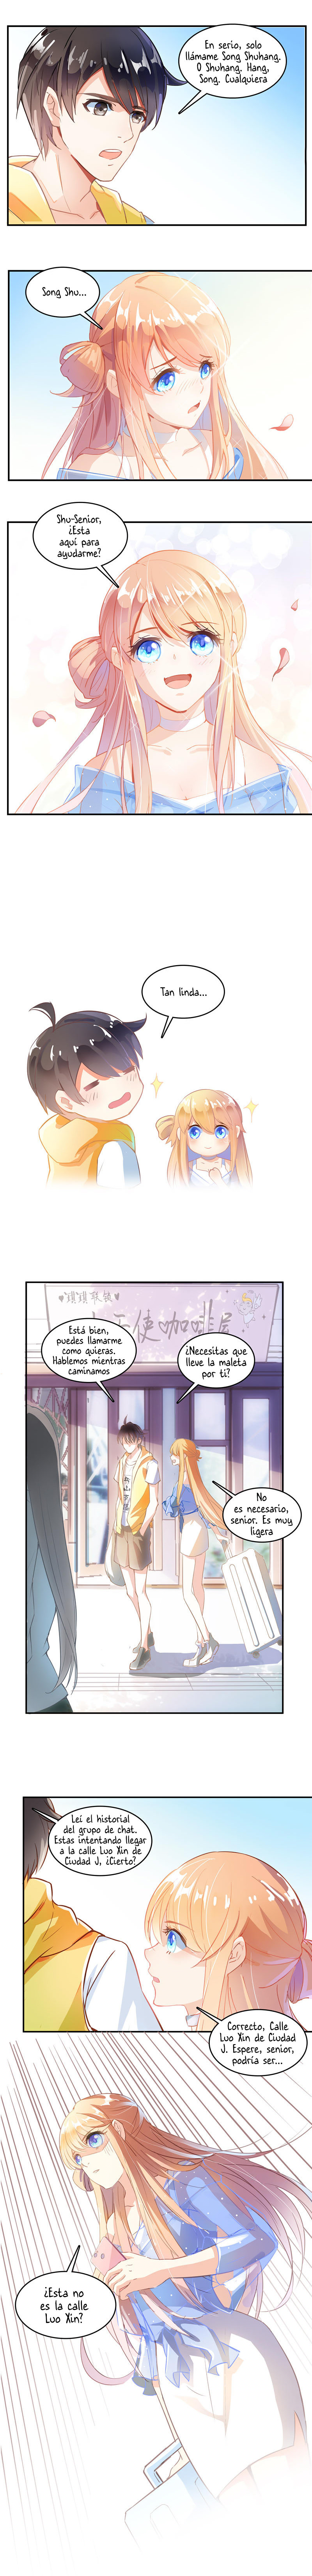 Manga Cultivation Chat Group Chapter 9 image number 6